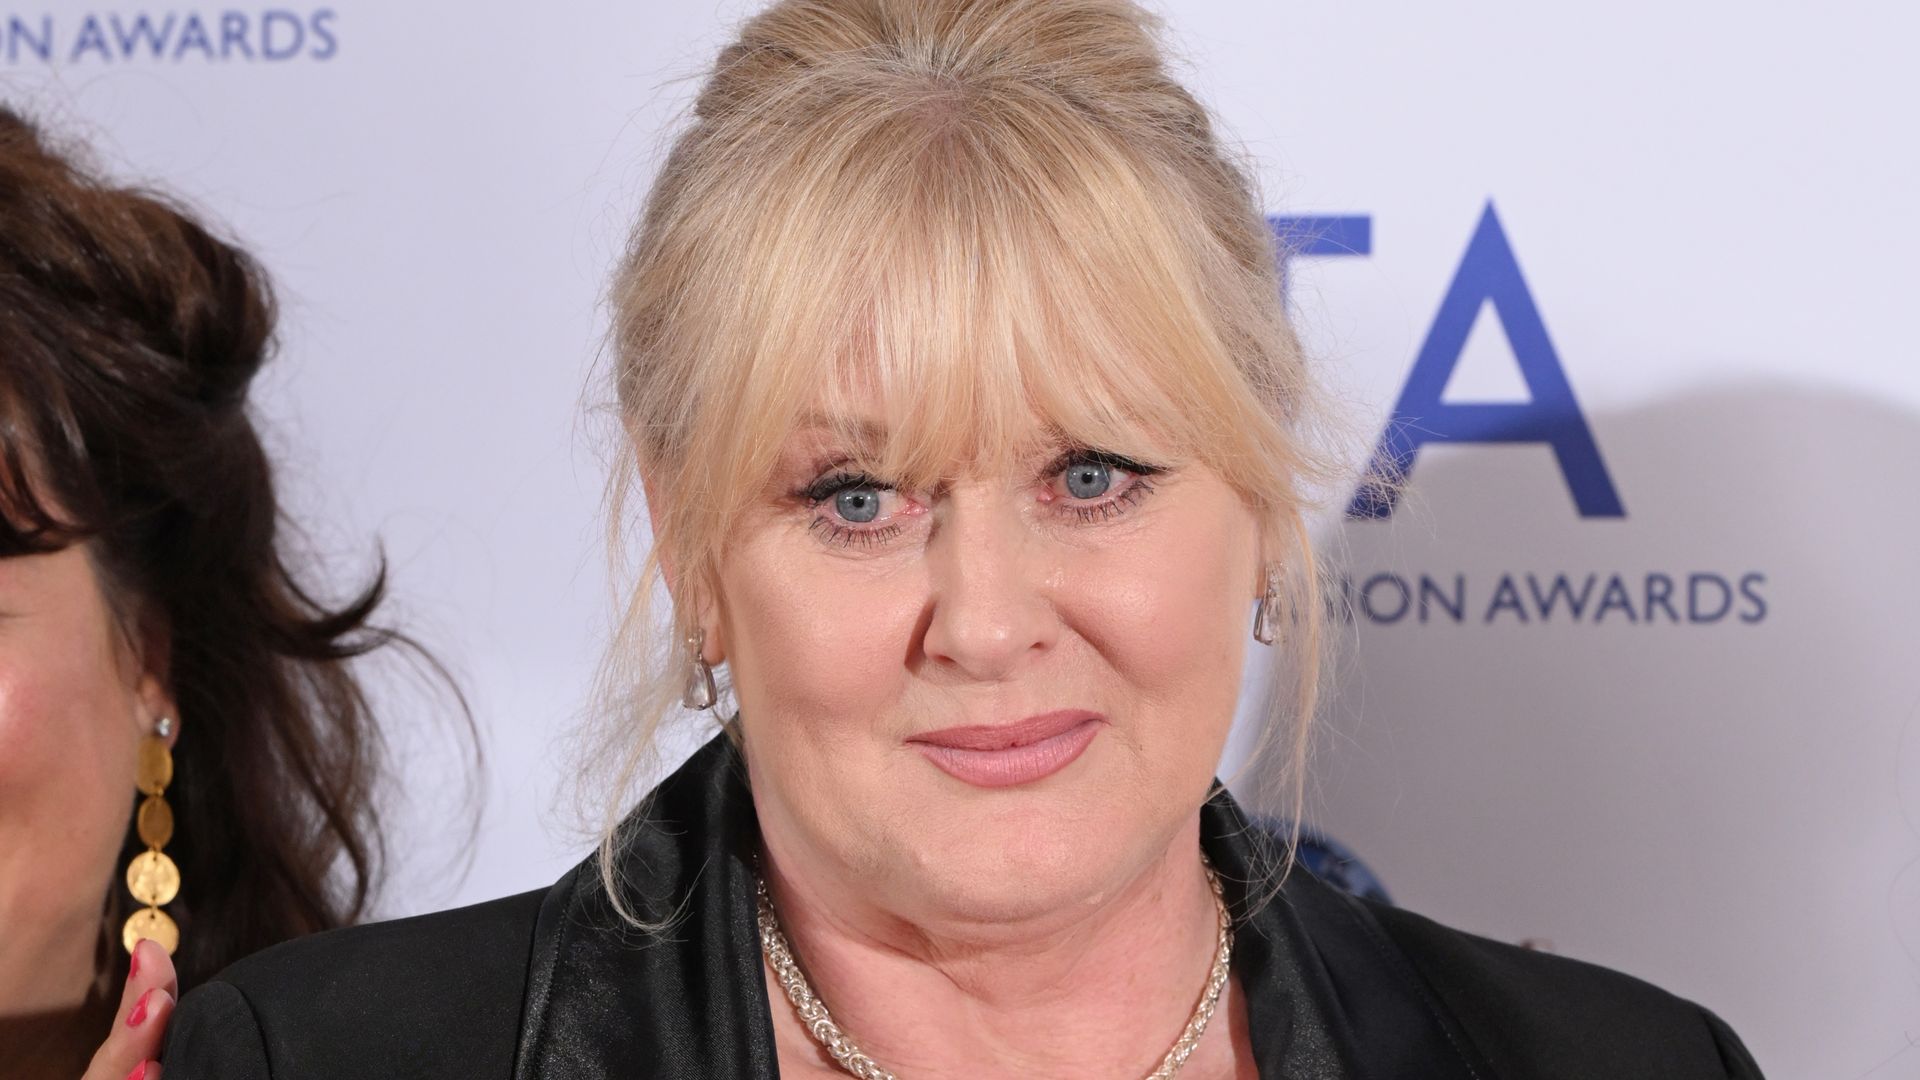 Sarah Lancashire with the award for Returning Drama for "Happy Valley" in the National Television Awards 2023 Winners Room at The O2 Arena